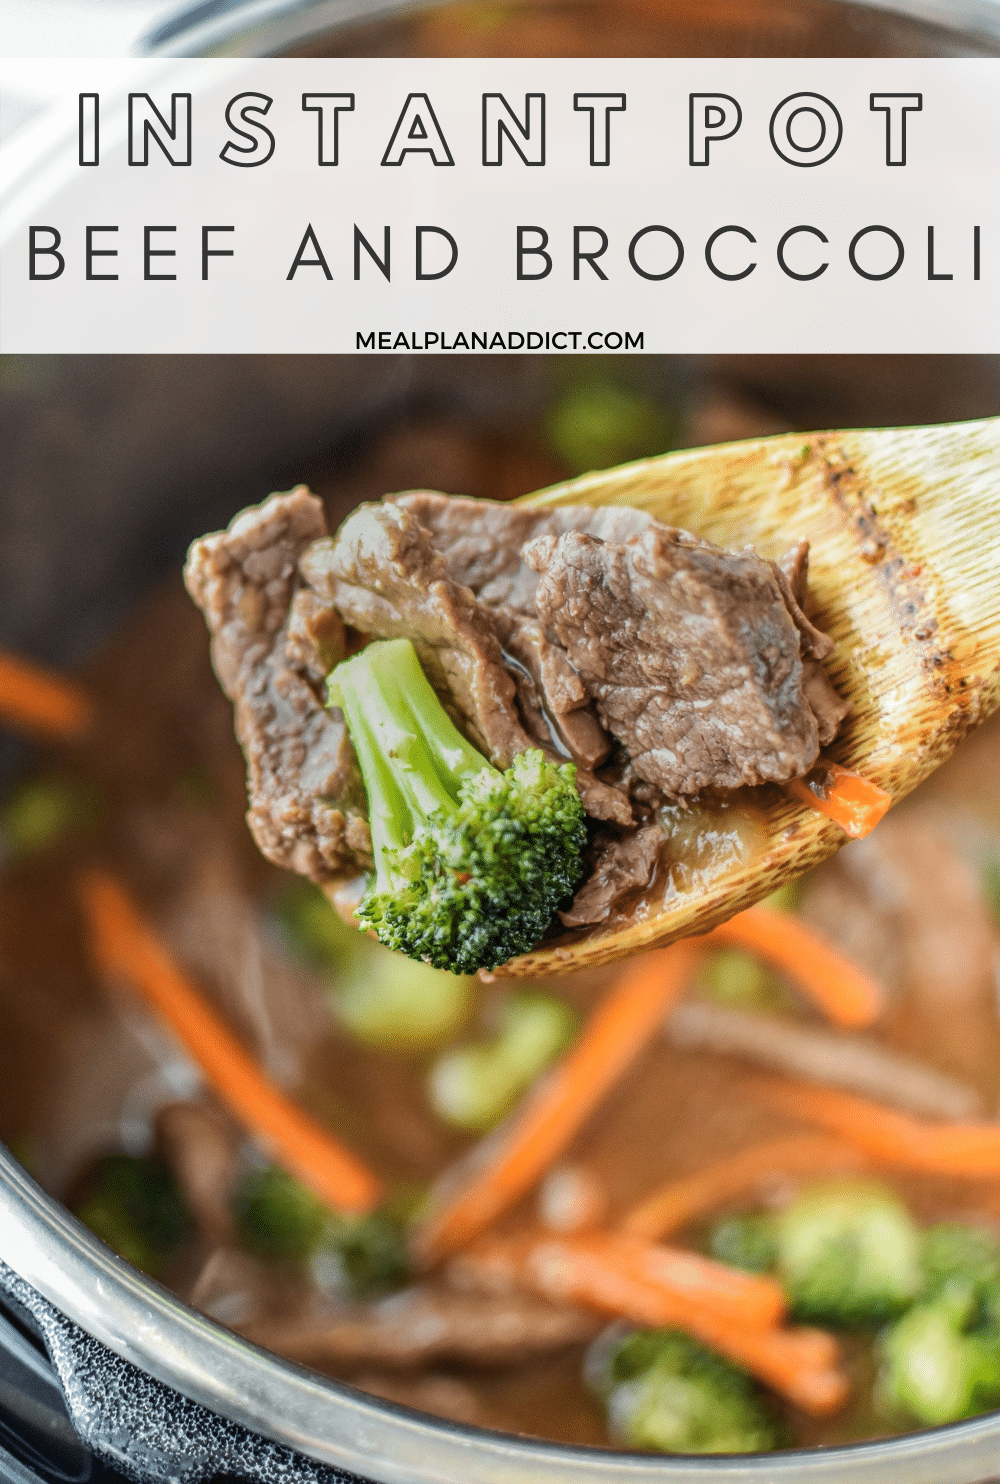 Beef and broccoli pin for pinterest